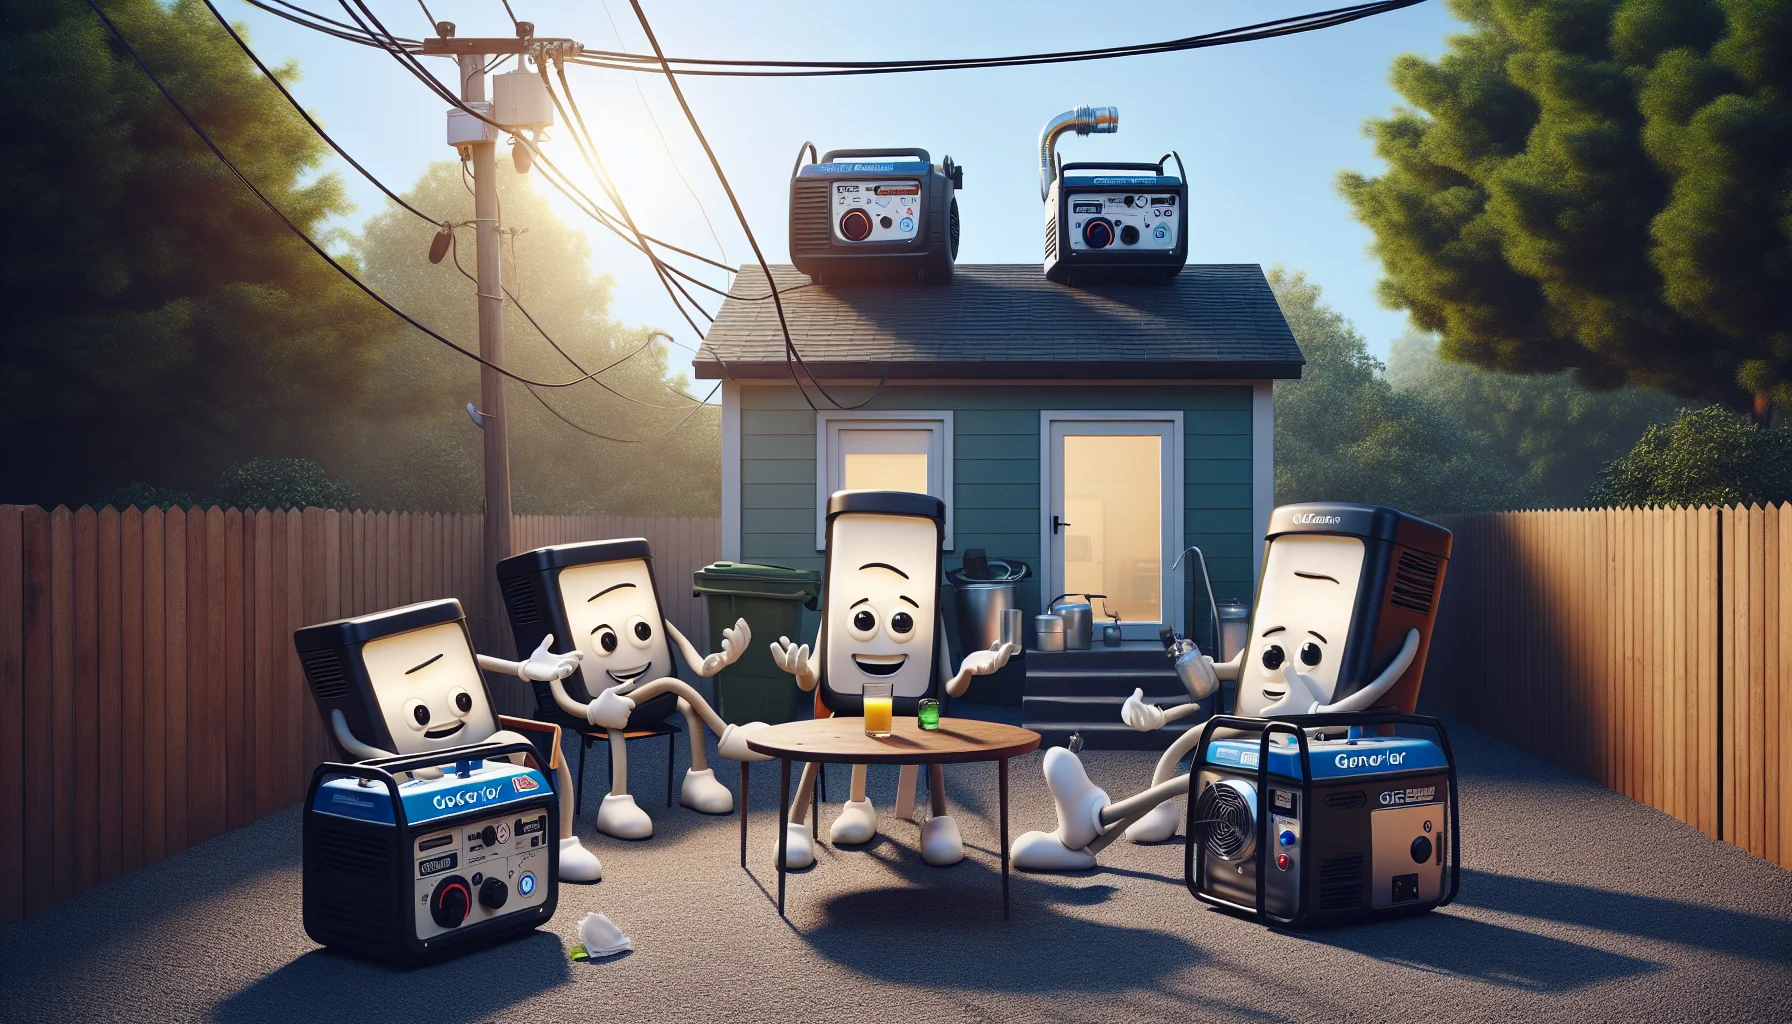 Create a humorous and realistic image representing the category of tri-fuel generators. The scene should be playful and engaging, convincing the viewers to consider generating their own electricity. It could include a unique setting such as a group of animated tri-fuel generators having a lively discussion about electricity production in a comic style, allowing them to provide a spirited gesture towards sustainability. This should be set in a familiar and relatable location like a typical suburban backyard during daylight, showcasing the convenience and advantages of home electricity generation.